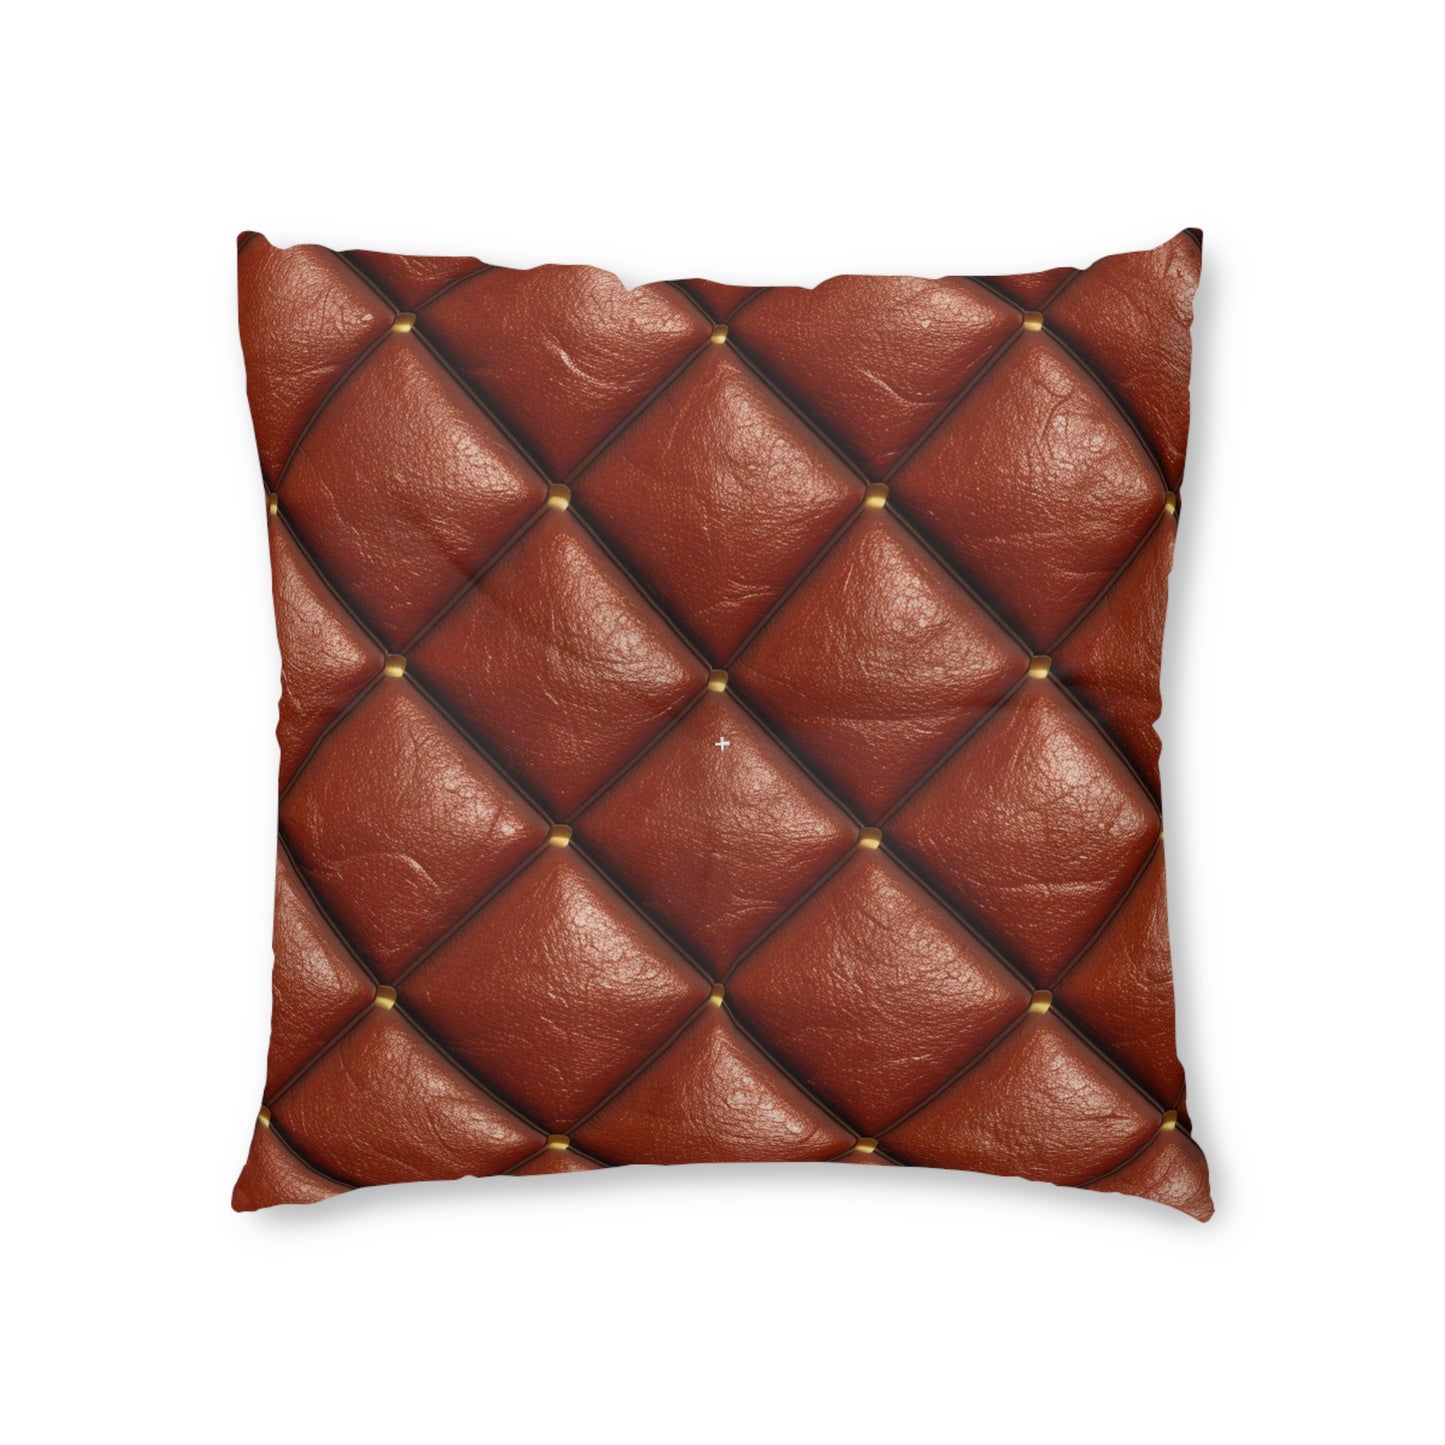 Brown Leather Cognac Pattern Rugged Durable Design Style - Tufted Floor Pillow, Square